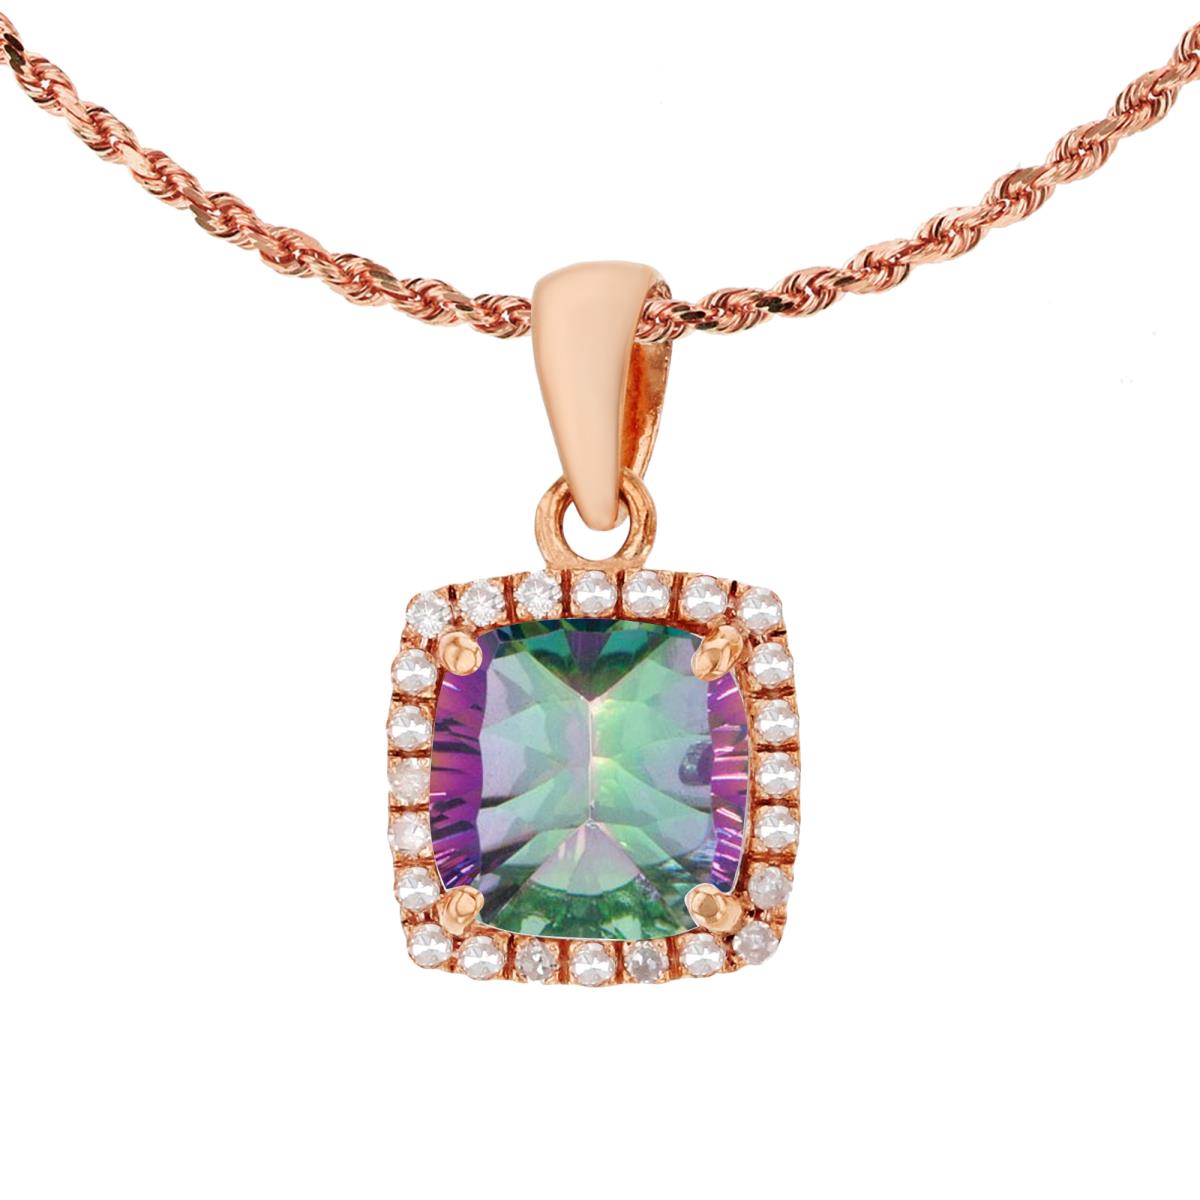 10K Rose Gold 7mm Cushion Mystic Green Topaz & 0.12 CTTW Diamond Halo 18" Rope Chain Necklace